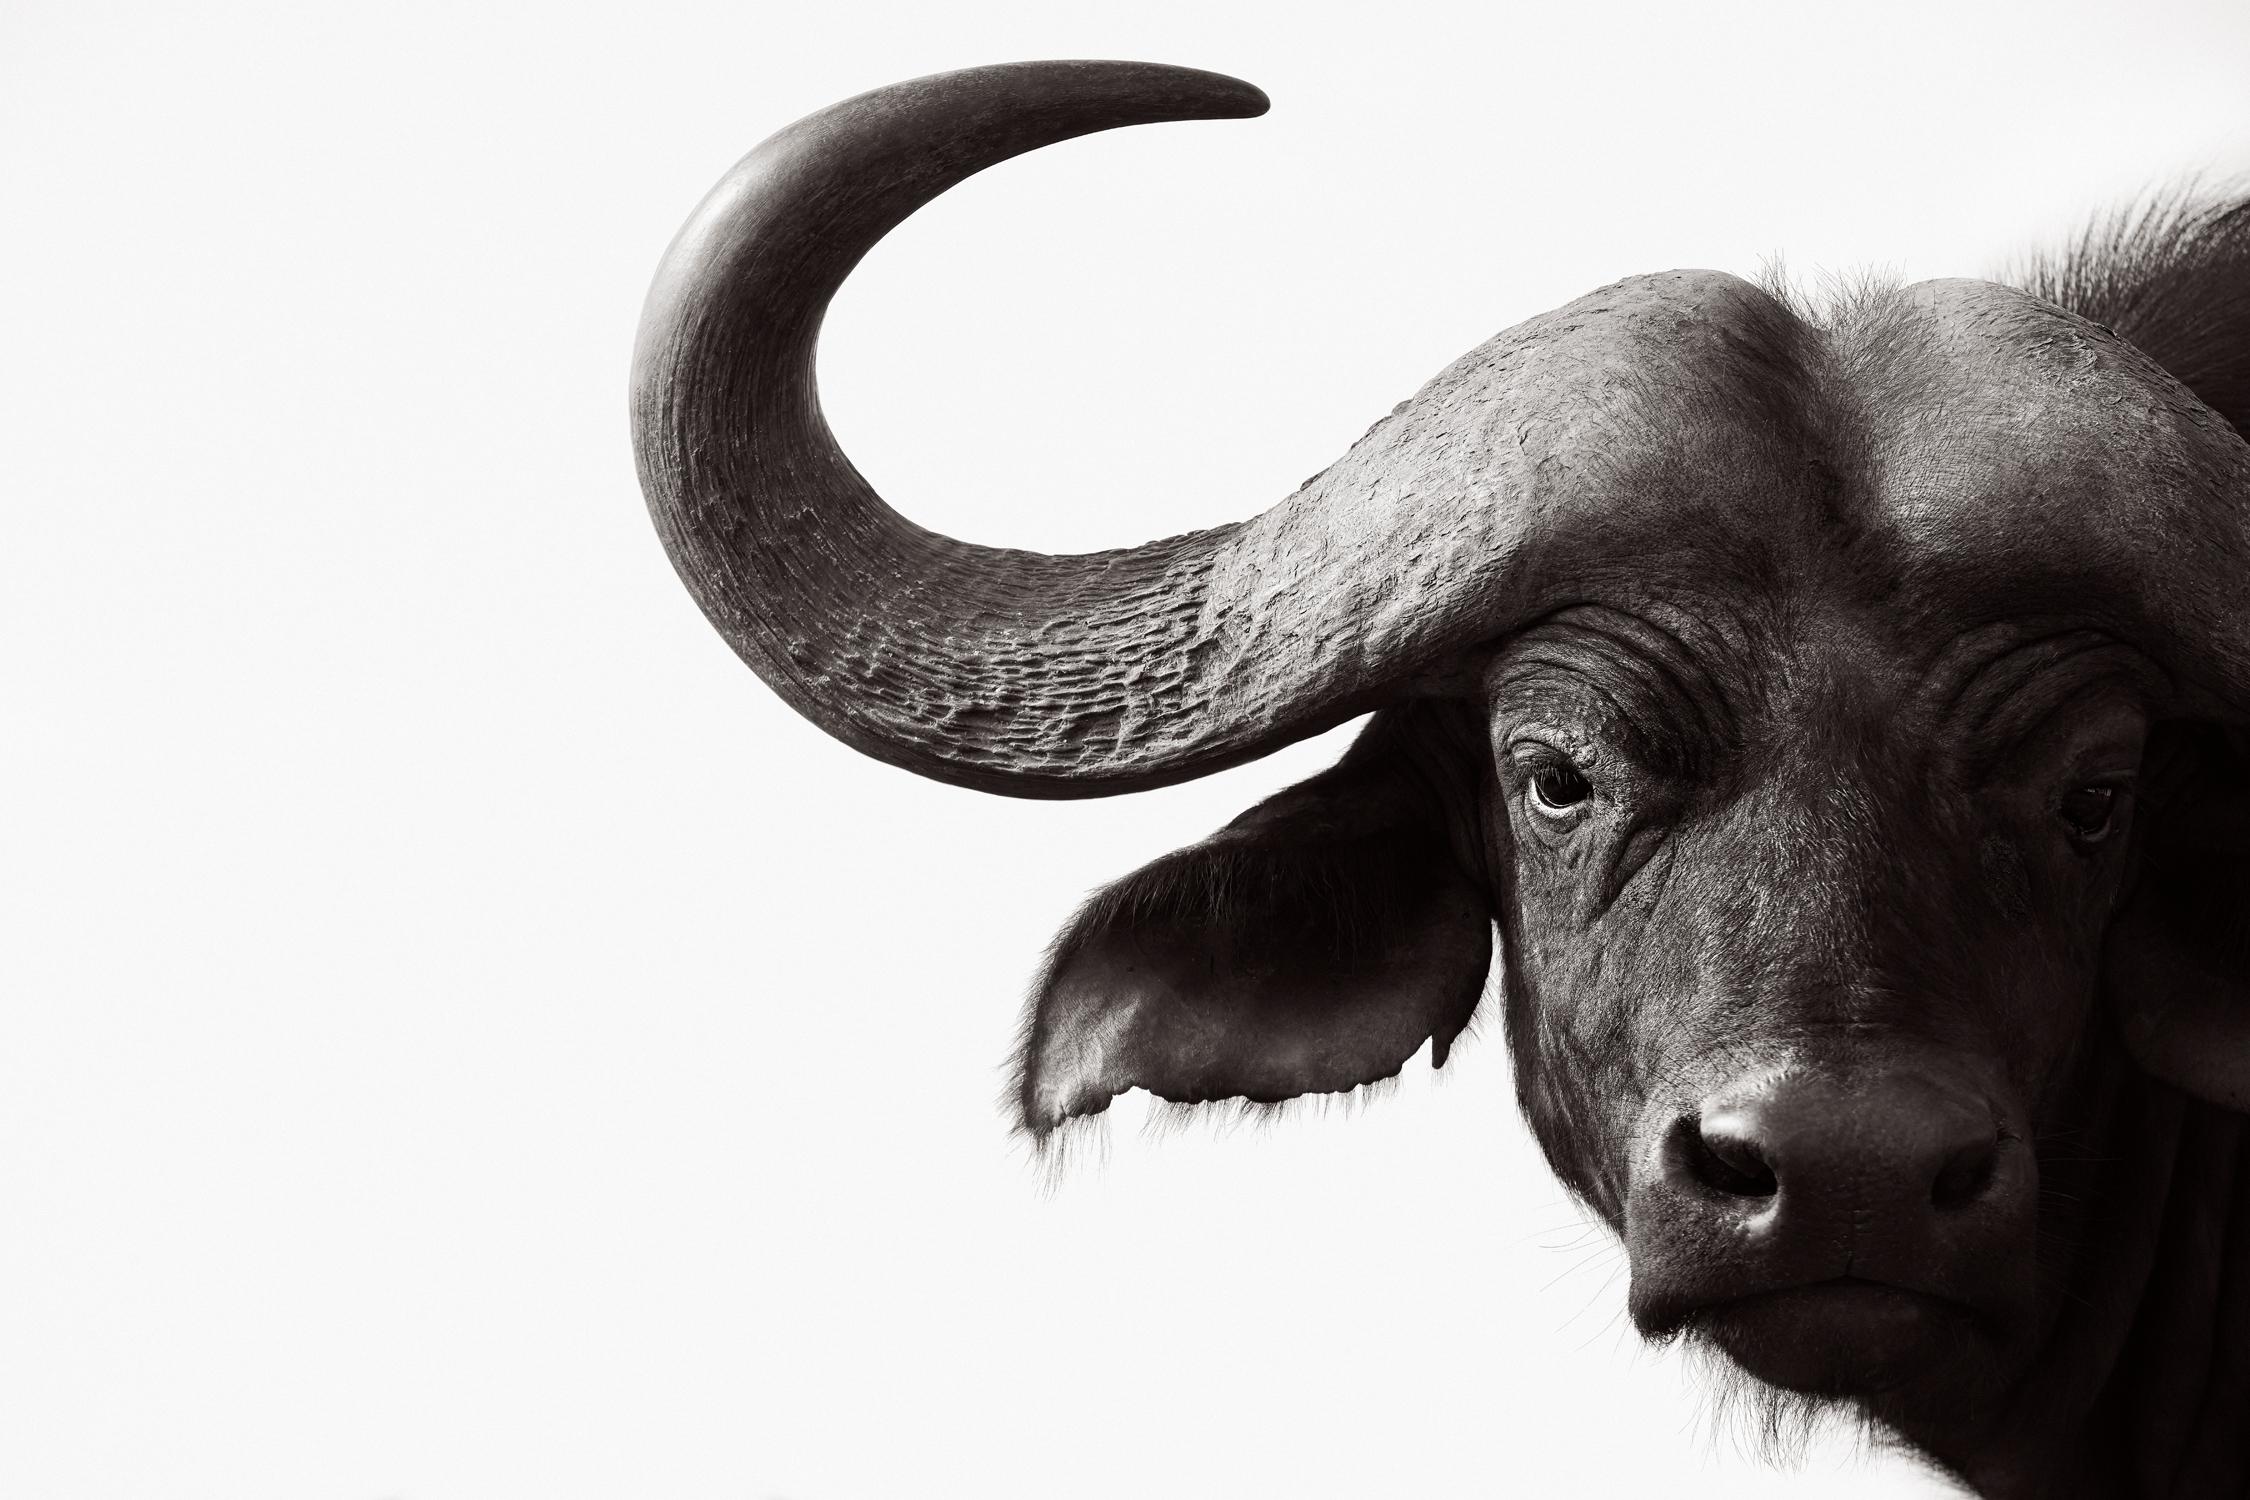 Drew Doggett Black and White Photograph - Portrait of a Water Buffalo Against a White Backdrop, Fashion-Inspired